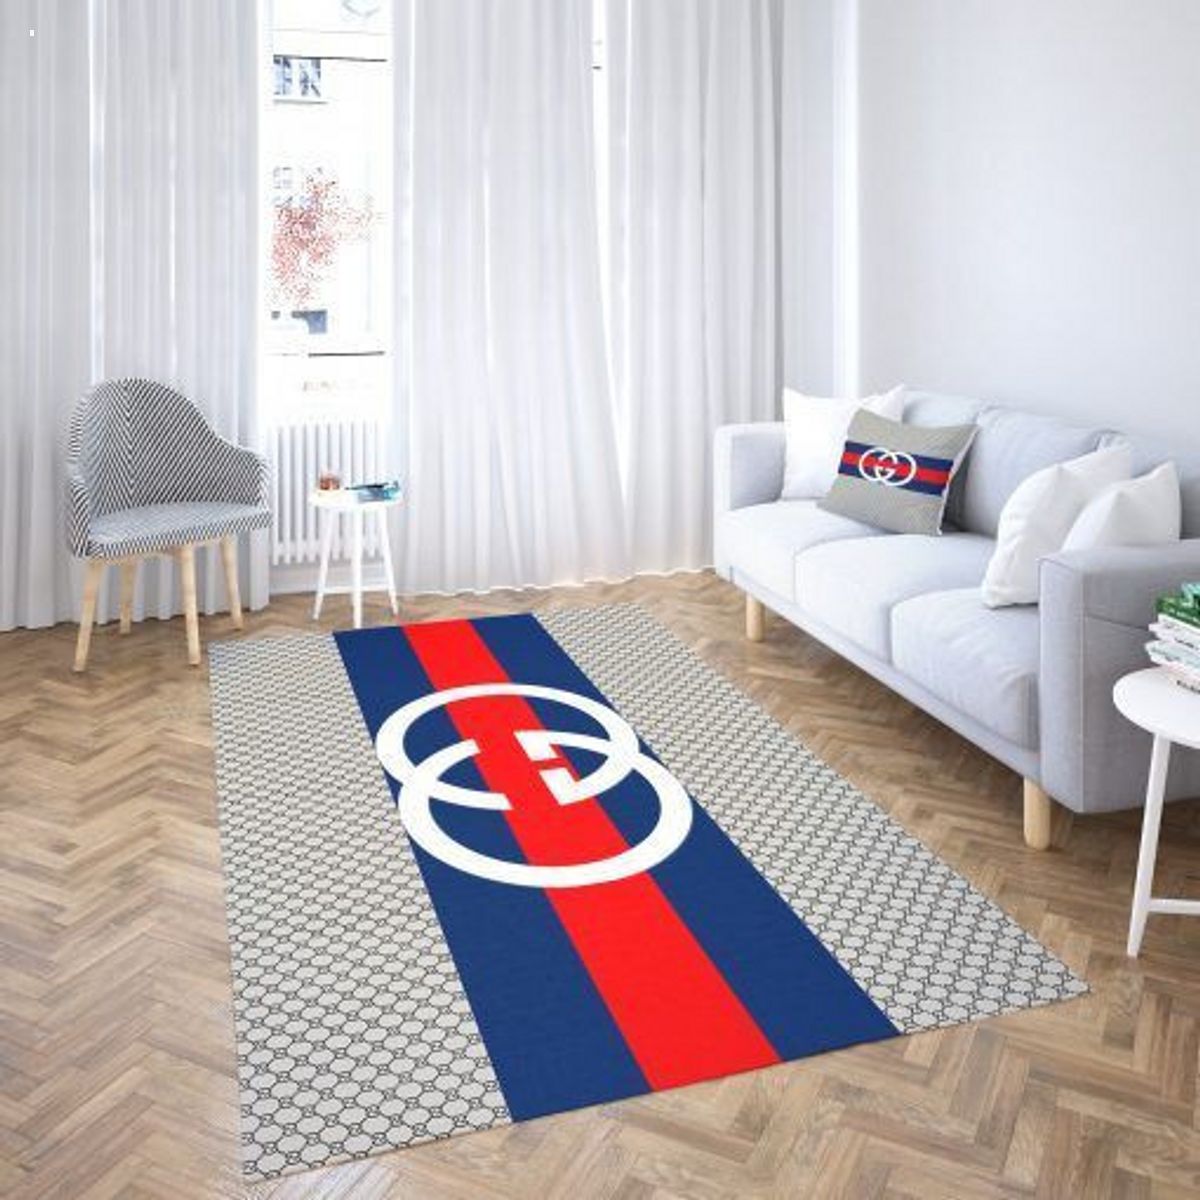 Gucci Stripe Mix Red Blue Luxury Brand Carpet Rug Limited Edition